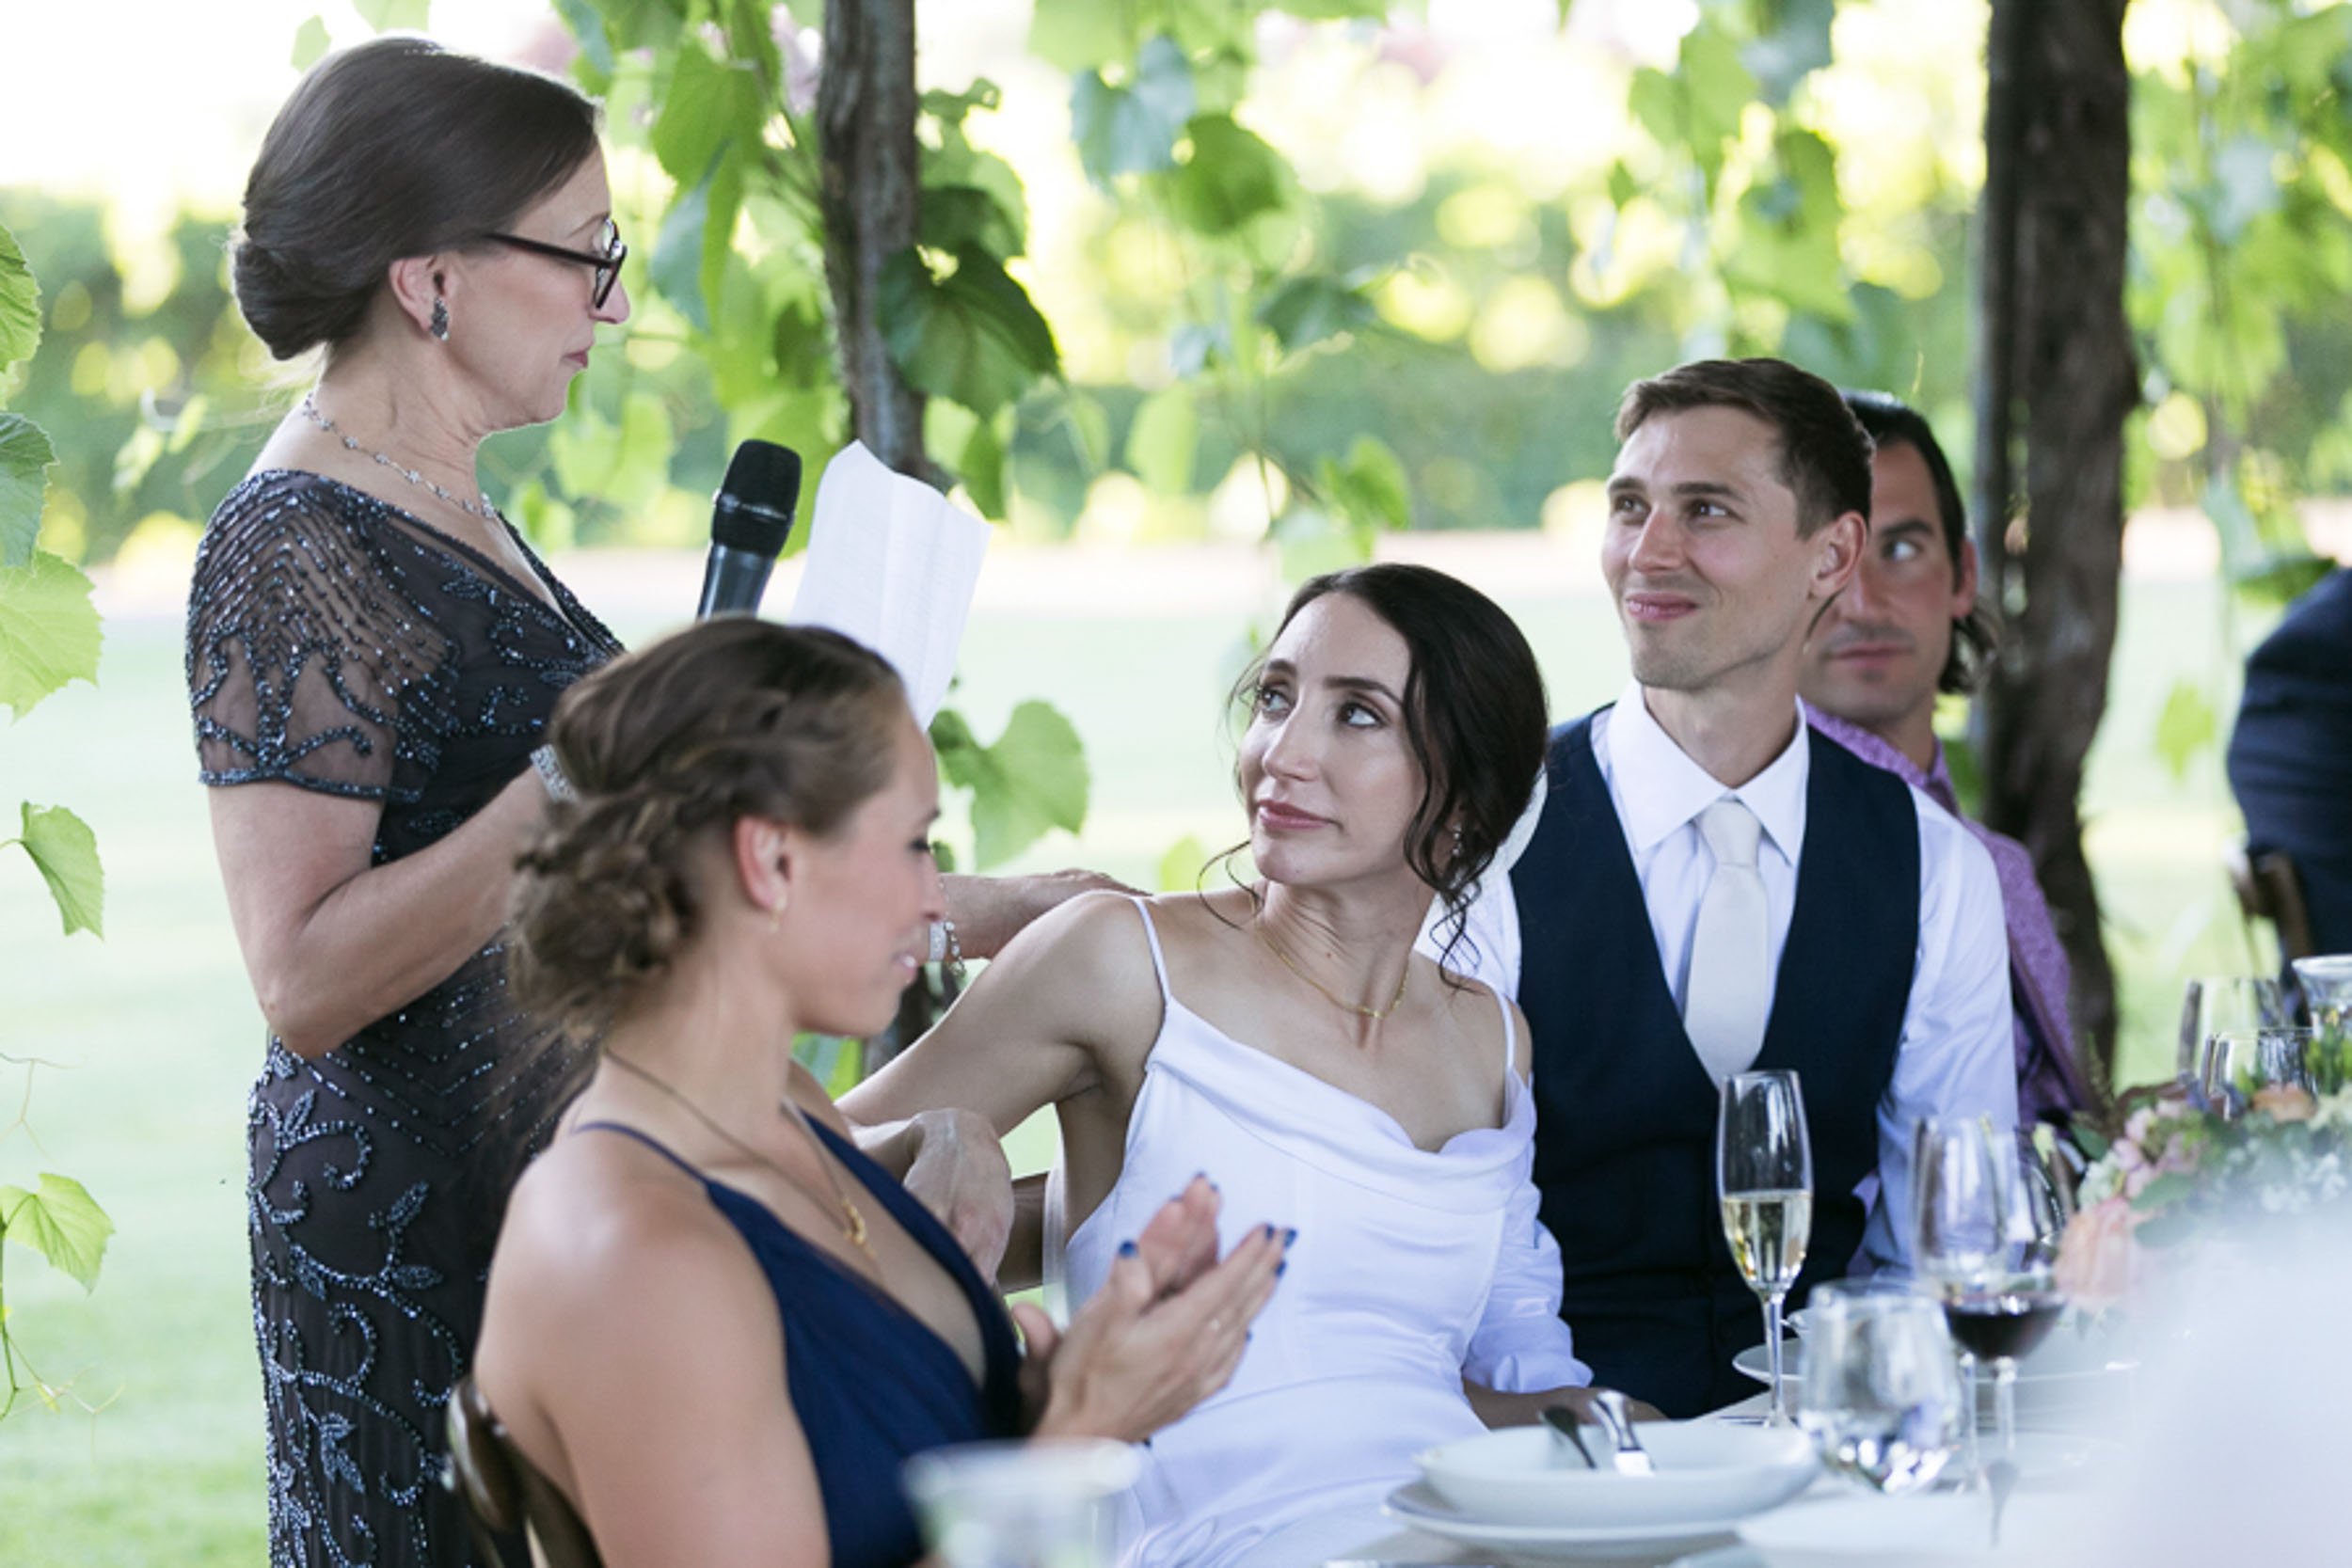 Candid Wedding Photography at Trentadue Winery 020.jpg